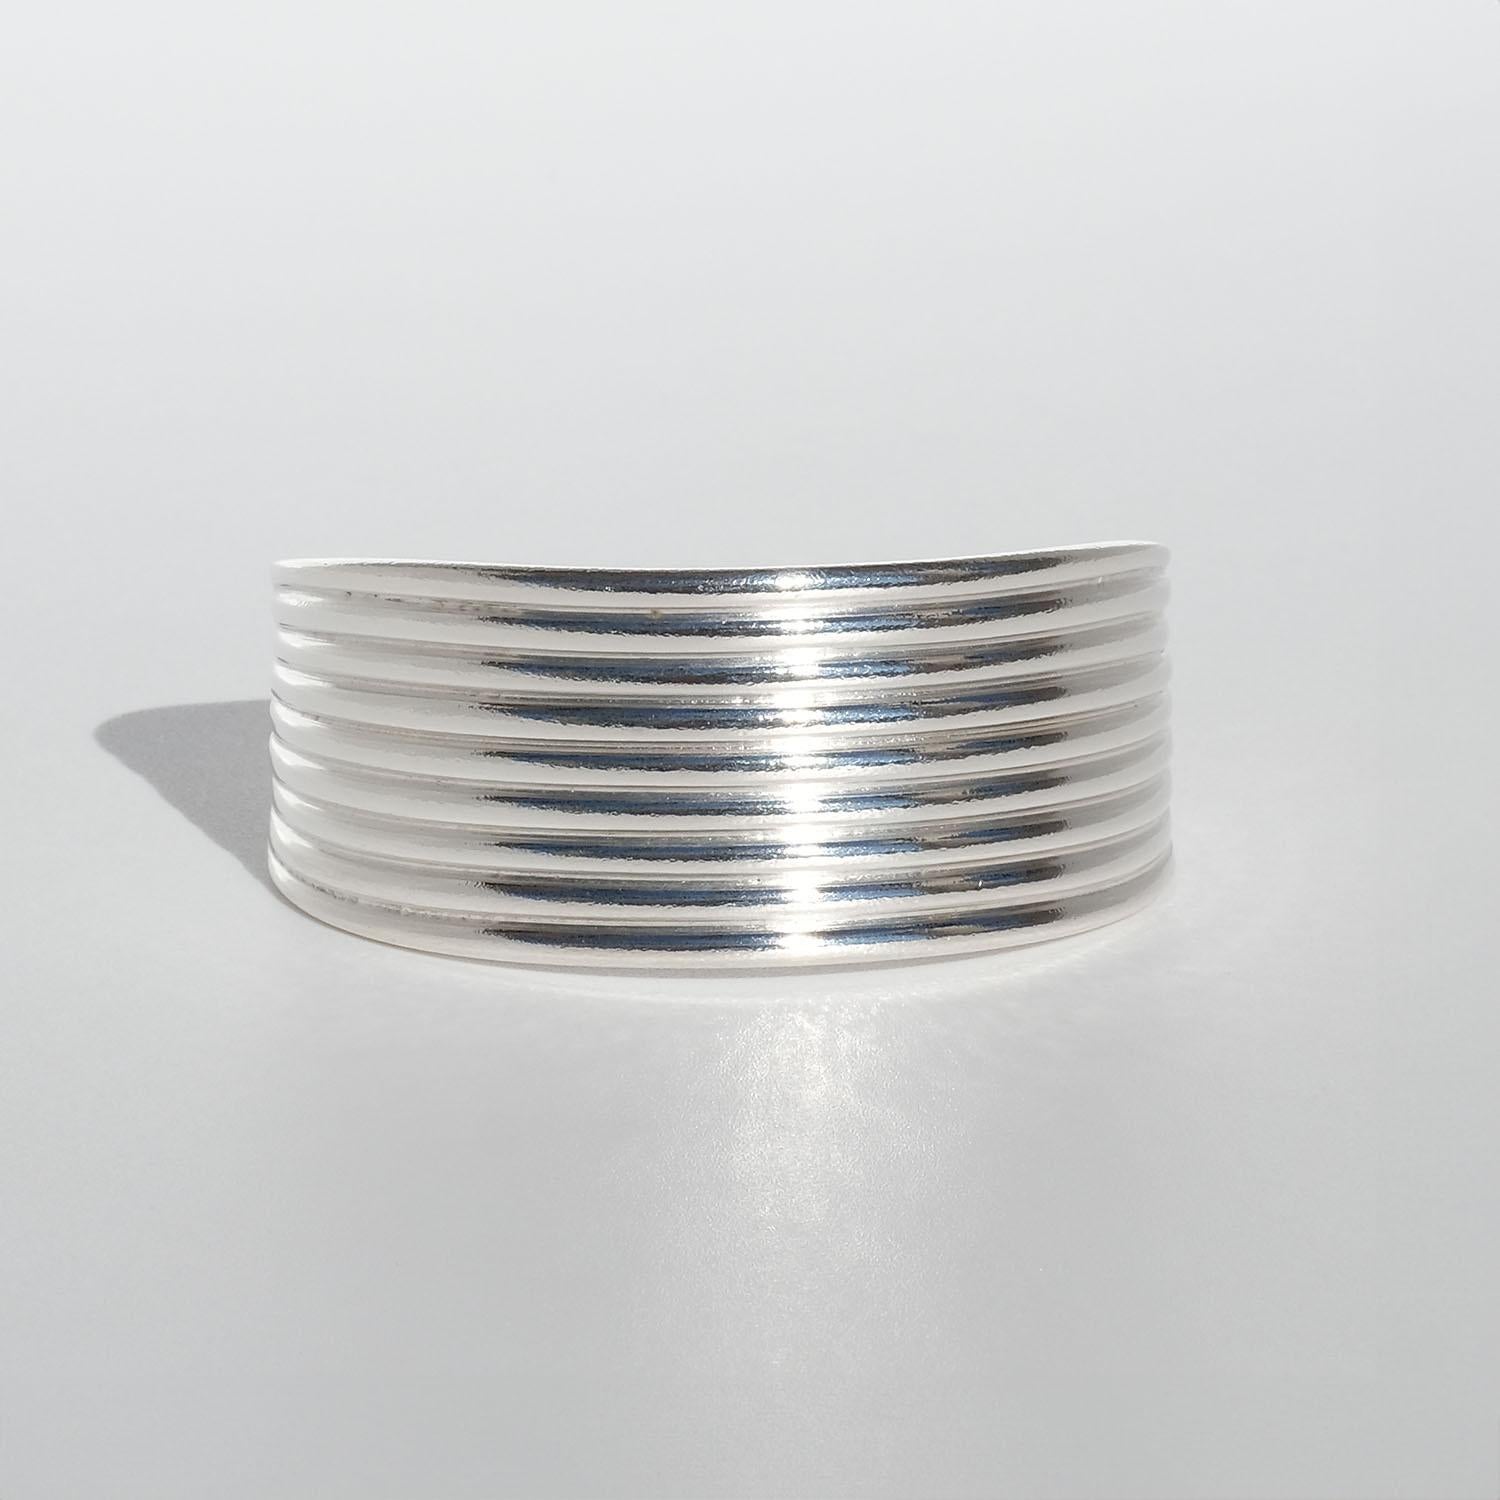 This silver cuff bracelet has a shiny, textured surface. Its shape can be described as simple and on point and it looks like something a roman warrior would wear.

The cuff bracelet radiates elegance and is a great example of timeless jewelry. It is